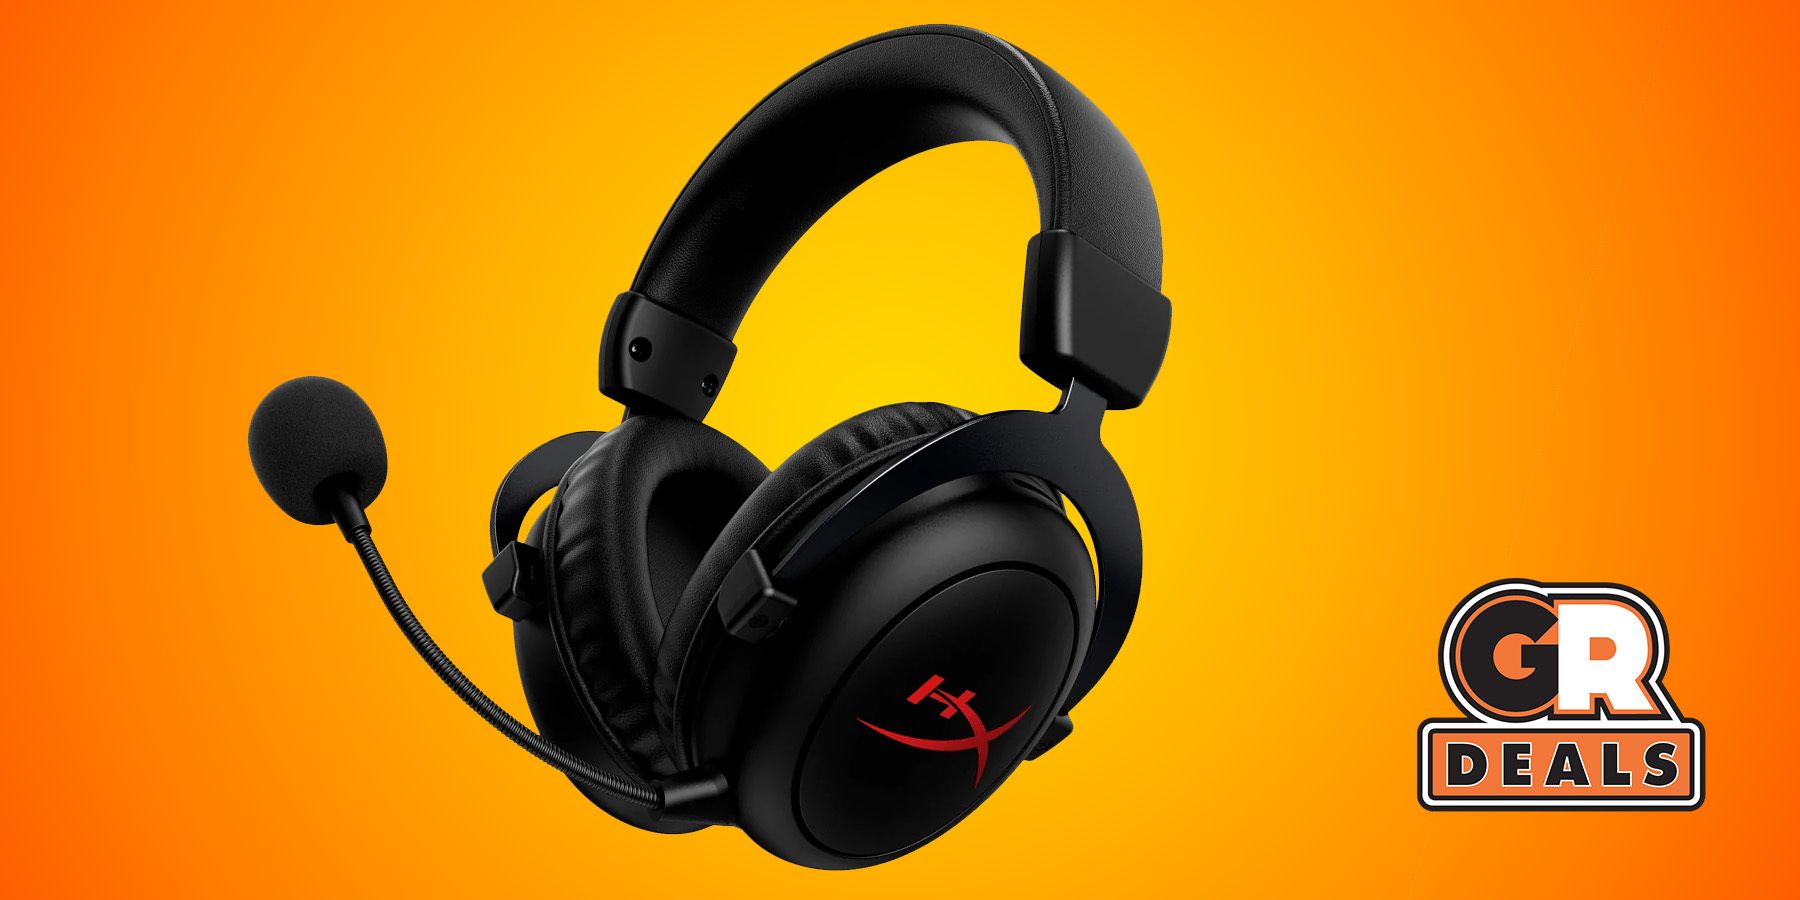 Hyper X Headsets – The Ultimate Gaming Experience